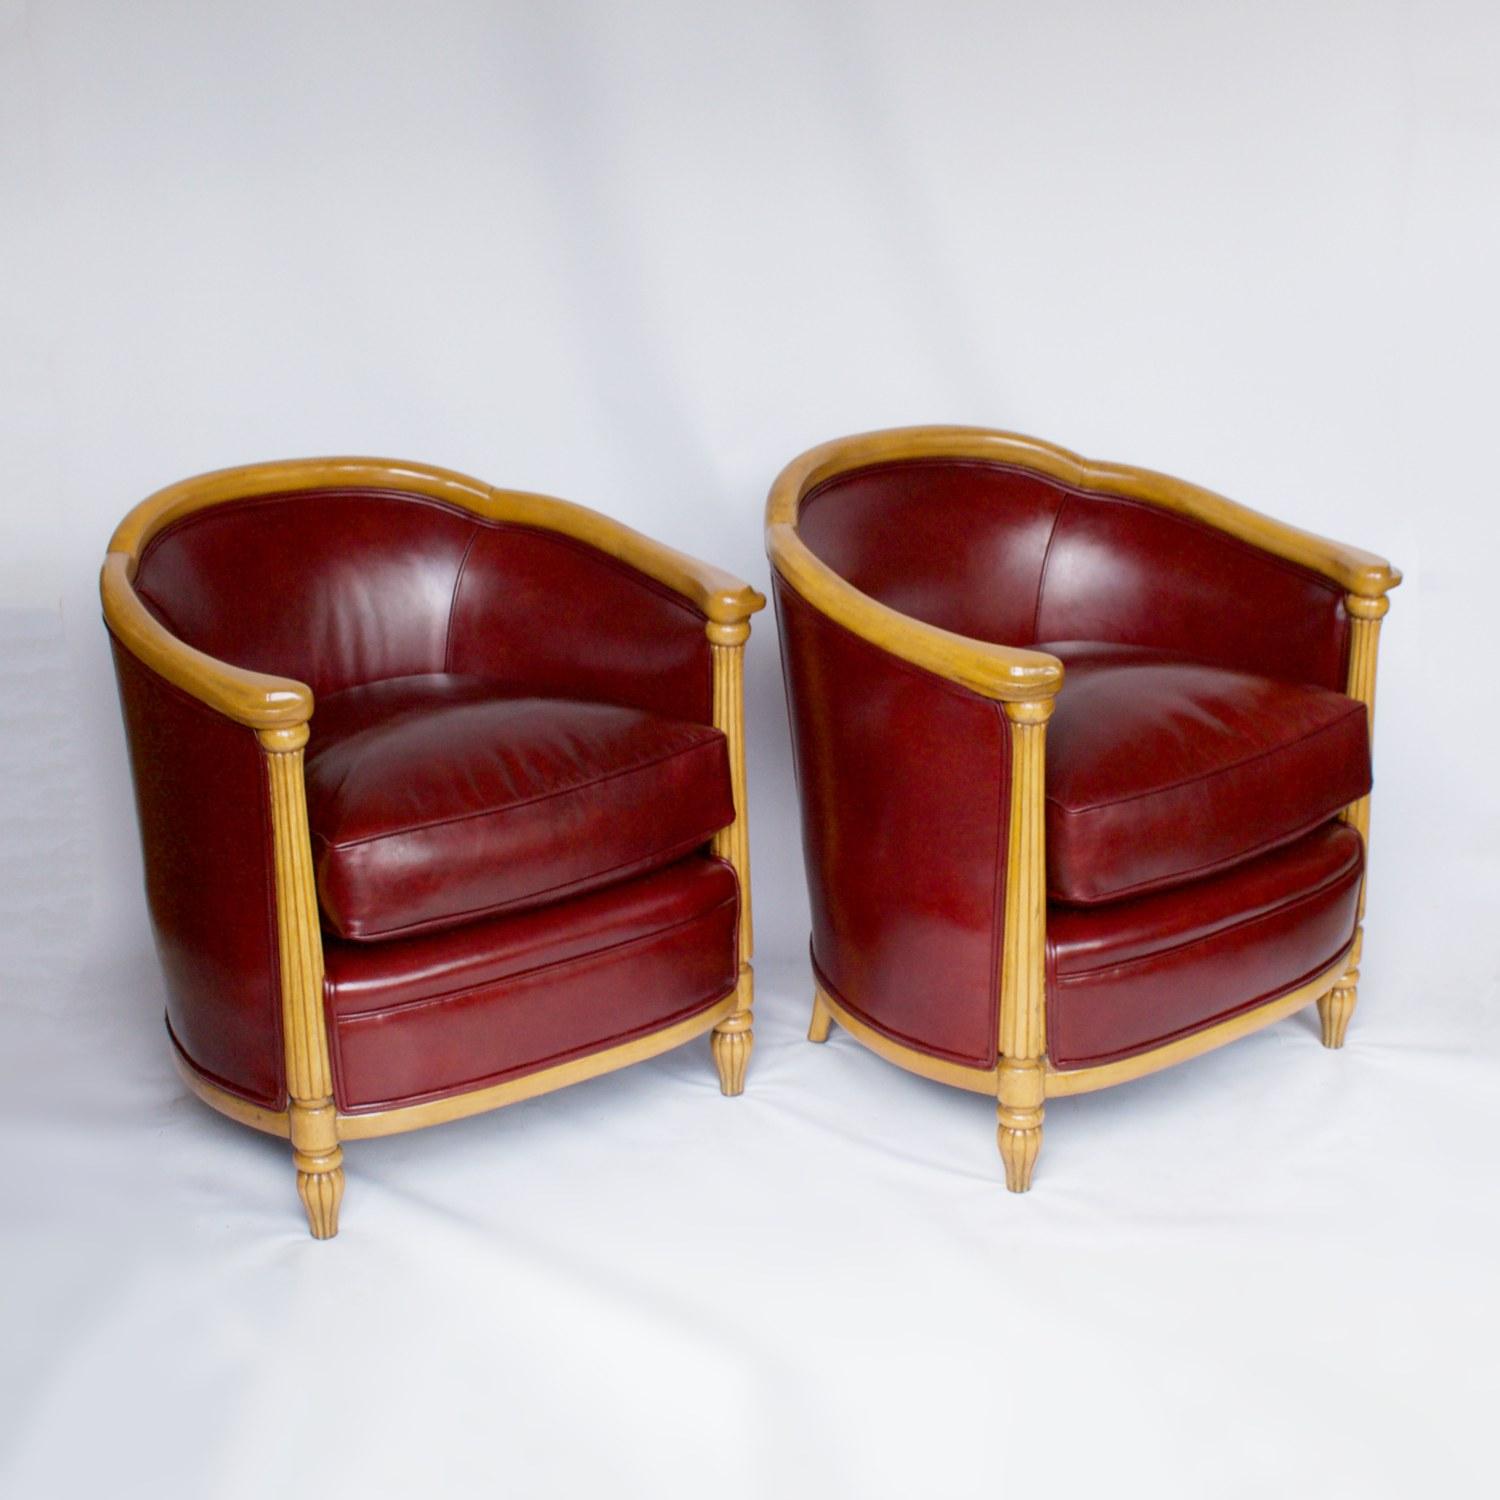 A pair of Art Deco tub chairs with reeded front column legs and curved frame with carved hand rest detail. Solid beech, upholstered in red leather. 

Dimensions: 76.5cm W 69cm D 63cm, seat H 47cm

Origin: English

Date: circa 1935

Item